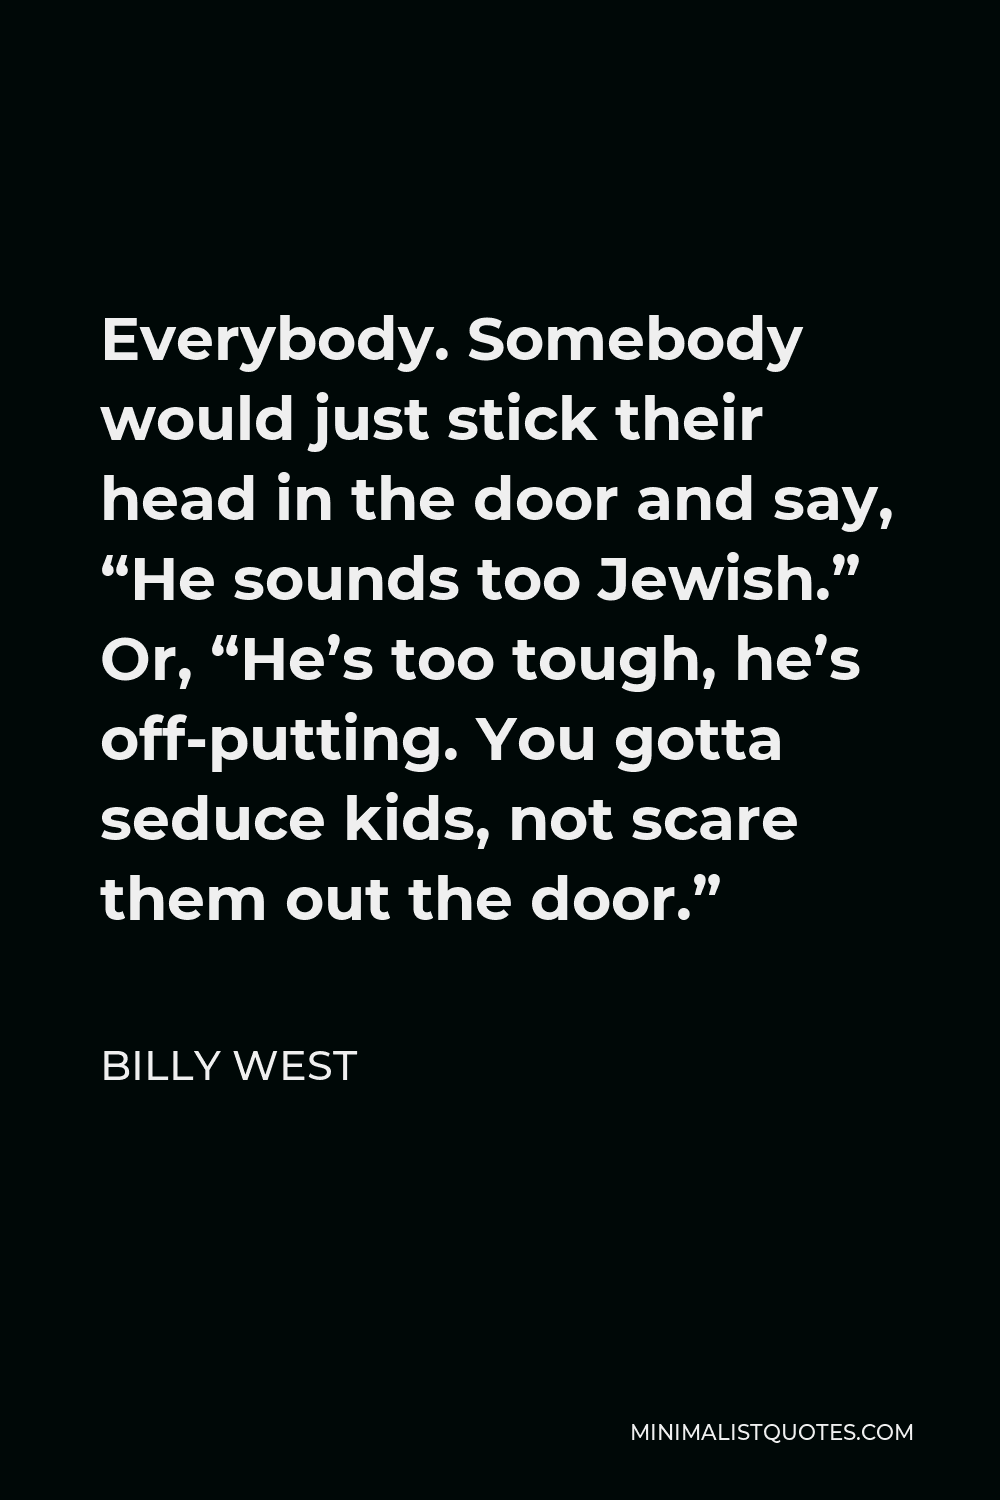 Billy West Quote - Everybody. Somebody would just stick their head in the door and say, “He sounds too Jewish.” Or, “He’s too tough, he’s off-putting. You gotta seduce kids, not scare them out the door.”